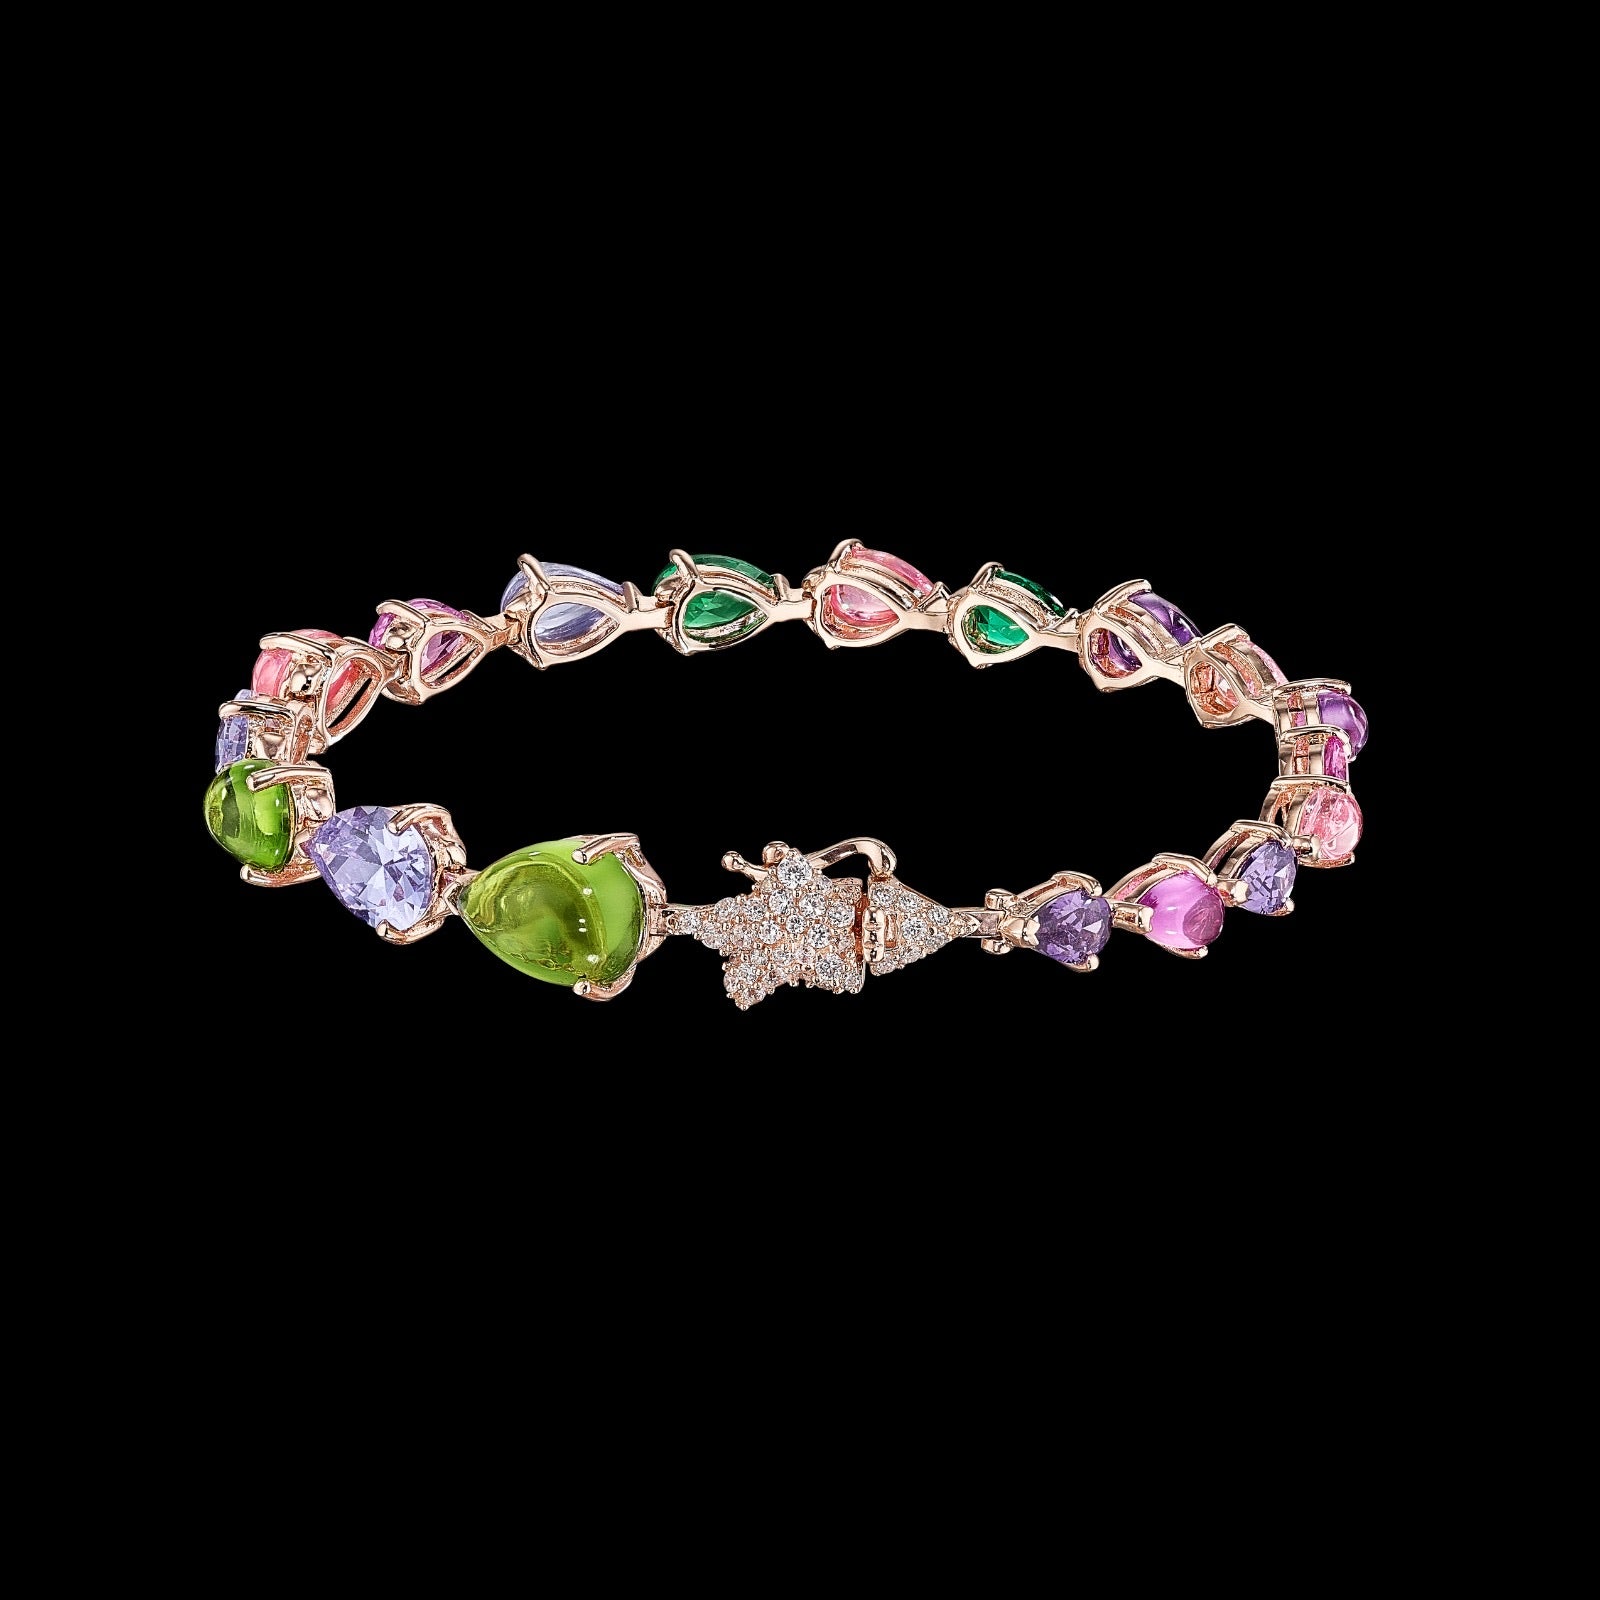 Candy Nova Bracelet, Bracelet, Anabela Chan Joaillerie - Fine jewelry with laboratory grown and created gemstones hand-crafted in the United Kingdom. Anabela Chan Joaillerie is the first fine jewellery brand in the world to champion laboratory-grown and created gemstones with high jewellery design, artisanal craftsmanship and a focus on ethical and sustainable innovations.